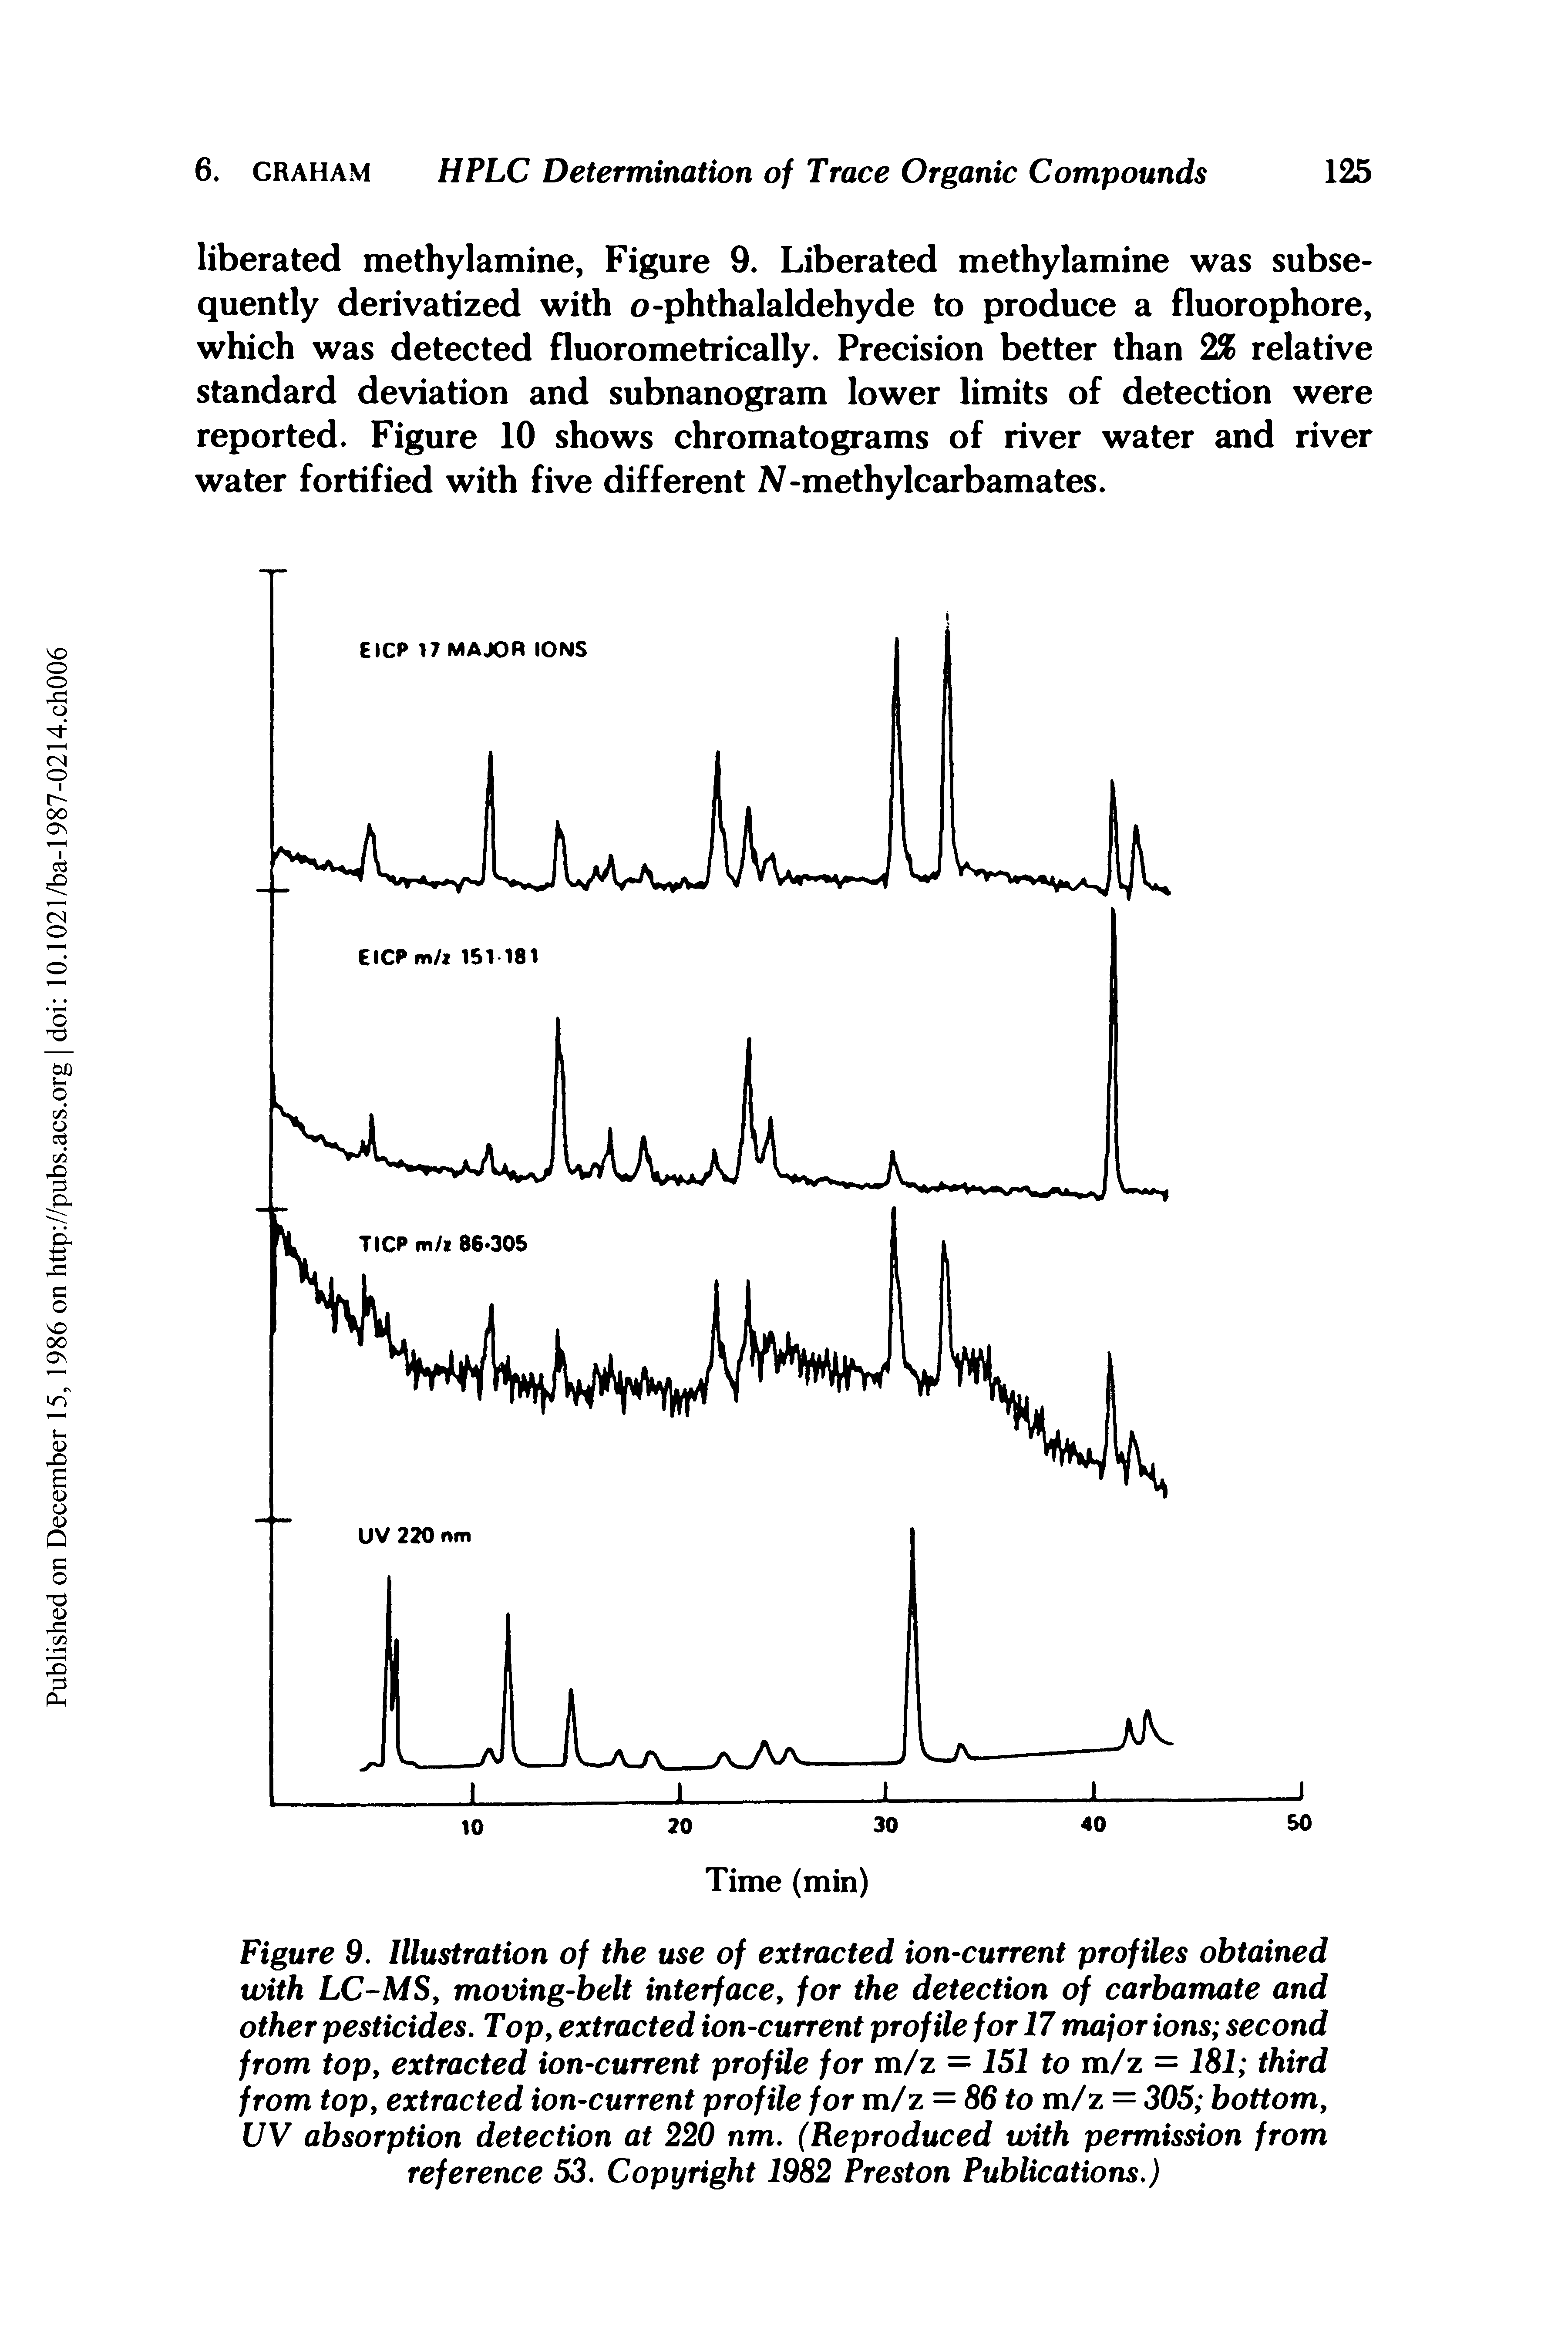 Figure 9. Illustration of the use of extracted ion-current profiles obtained with LC-MS, moving-belt interface, for the detection of carbamate and other pesticides. T op, extracted ion-current profile for 17 major ions second from top, extracted ion-current profile for m/z = 151 to m/z = 181 third from top, extracted ion-current profile for m/z = 86 to m/z = 305 bottom, UV absorption detection at 220 nm. (Reproduced with permission from reference 53. Copyright 1982 Preston Publications.)...